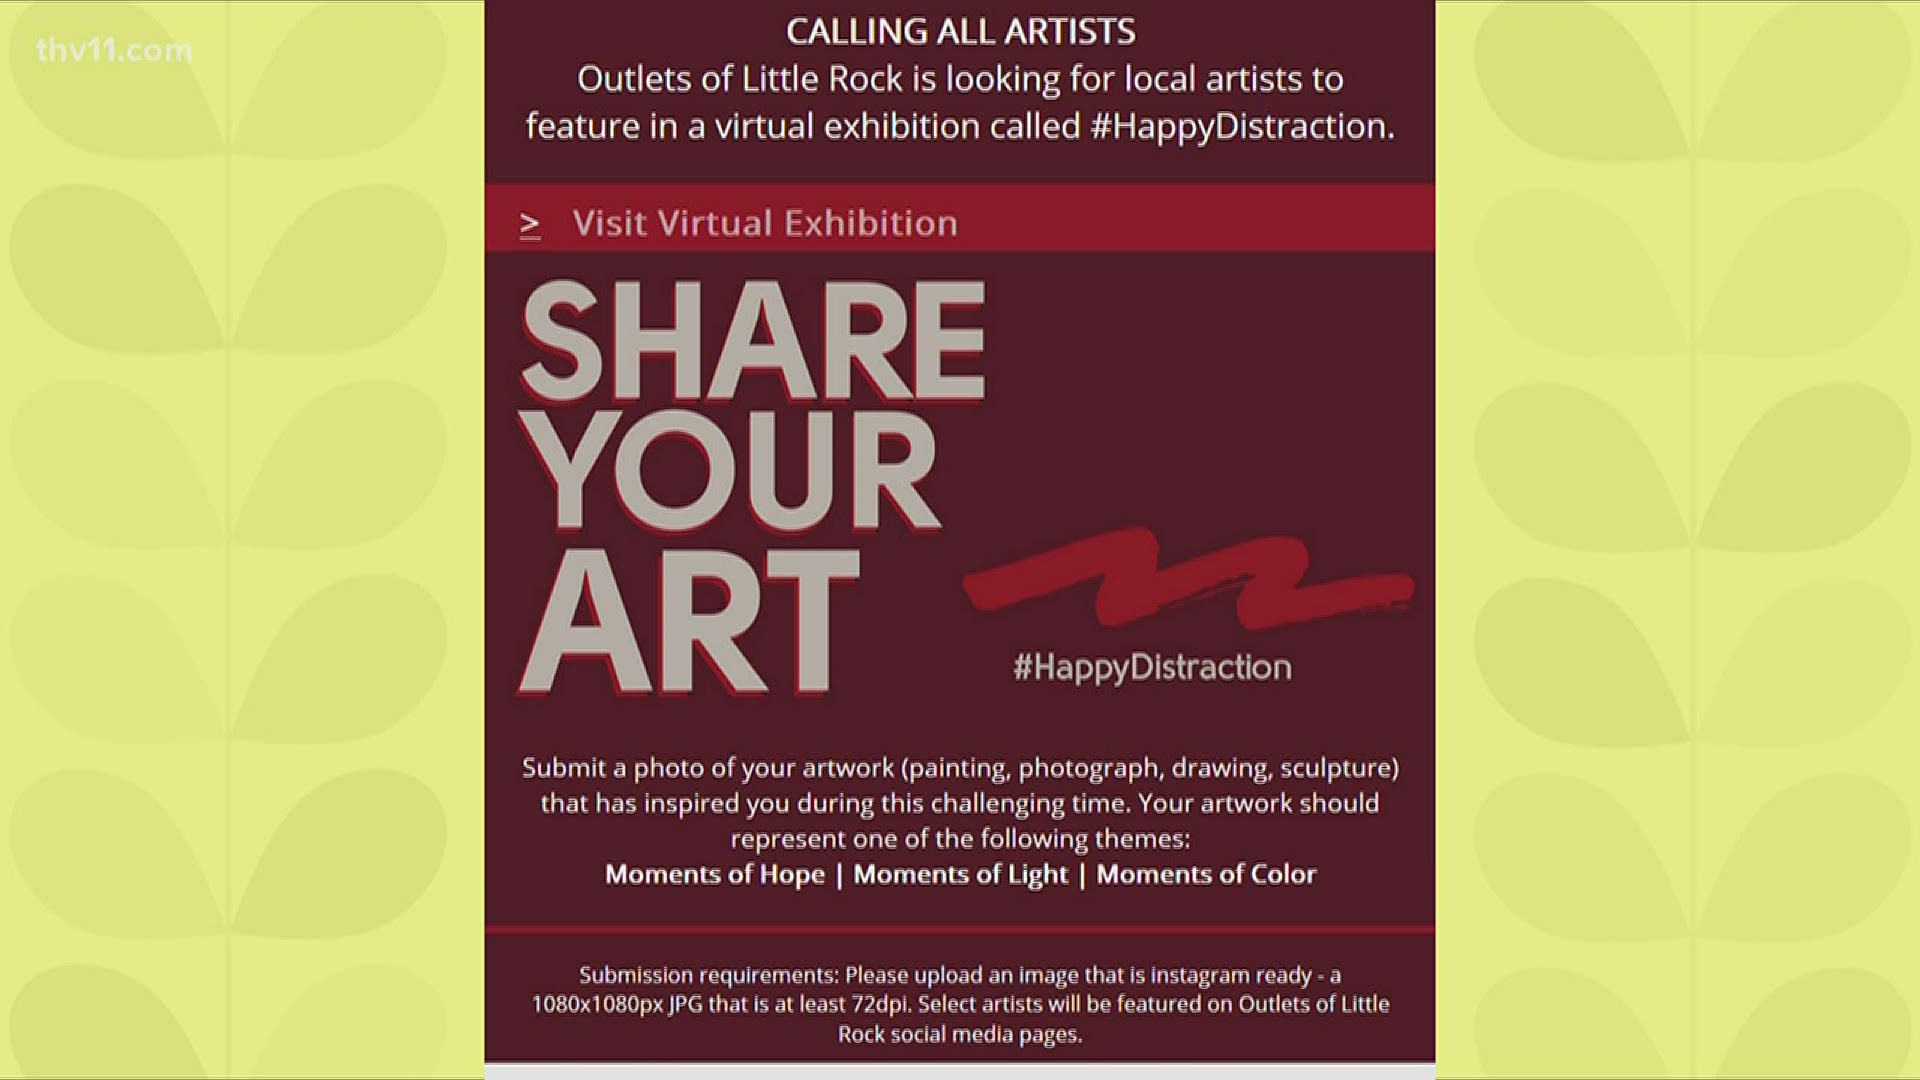 Happy Distraction Art Exhibition. Outlets of Little Rock asks local artists to share their art.